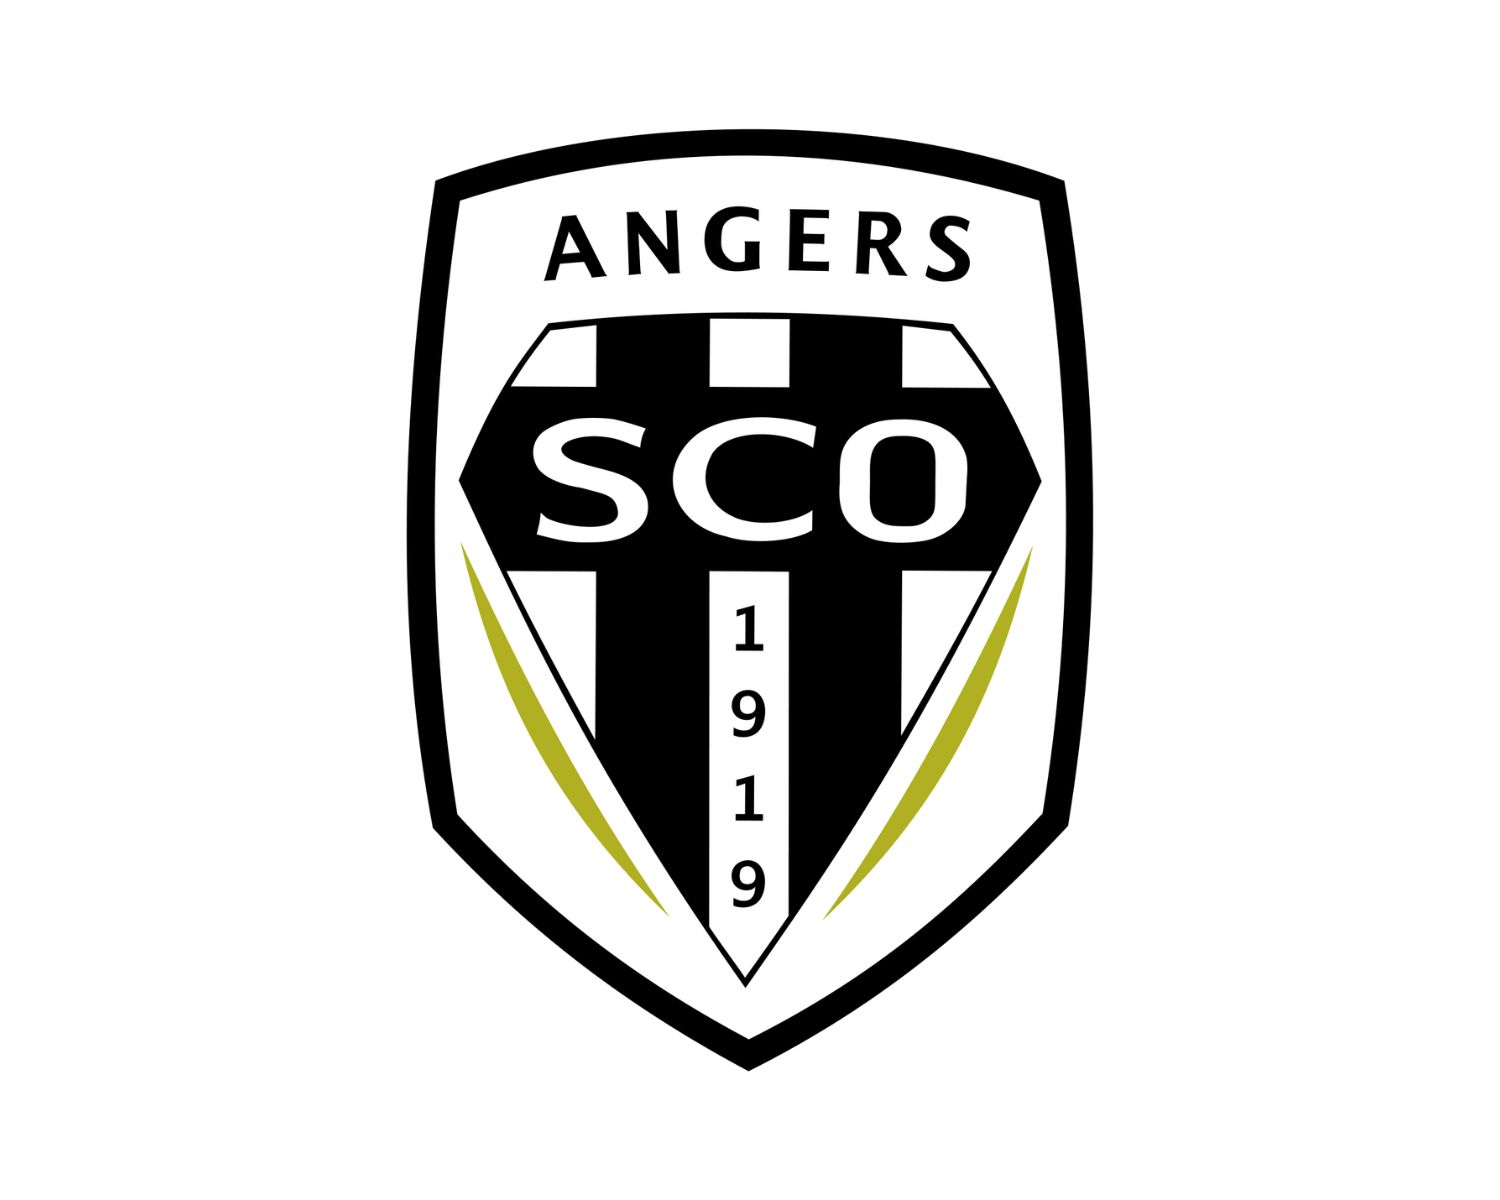 angers-sco-23-football-club-facts